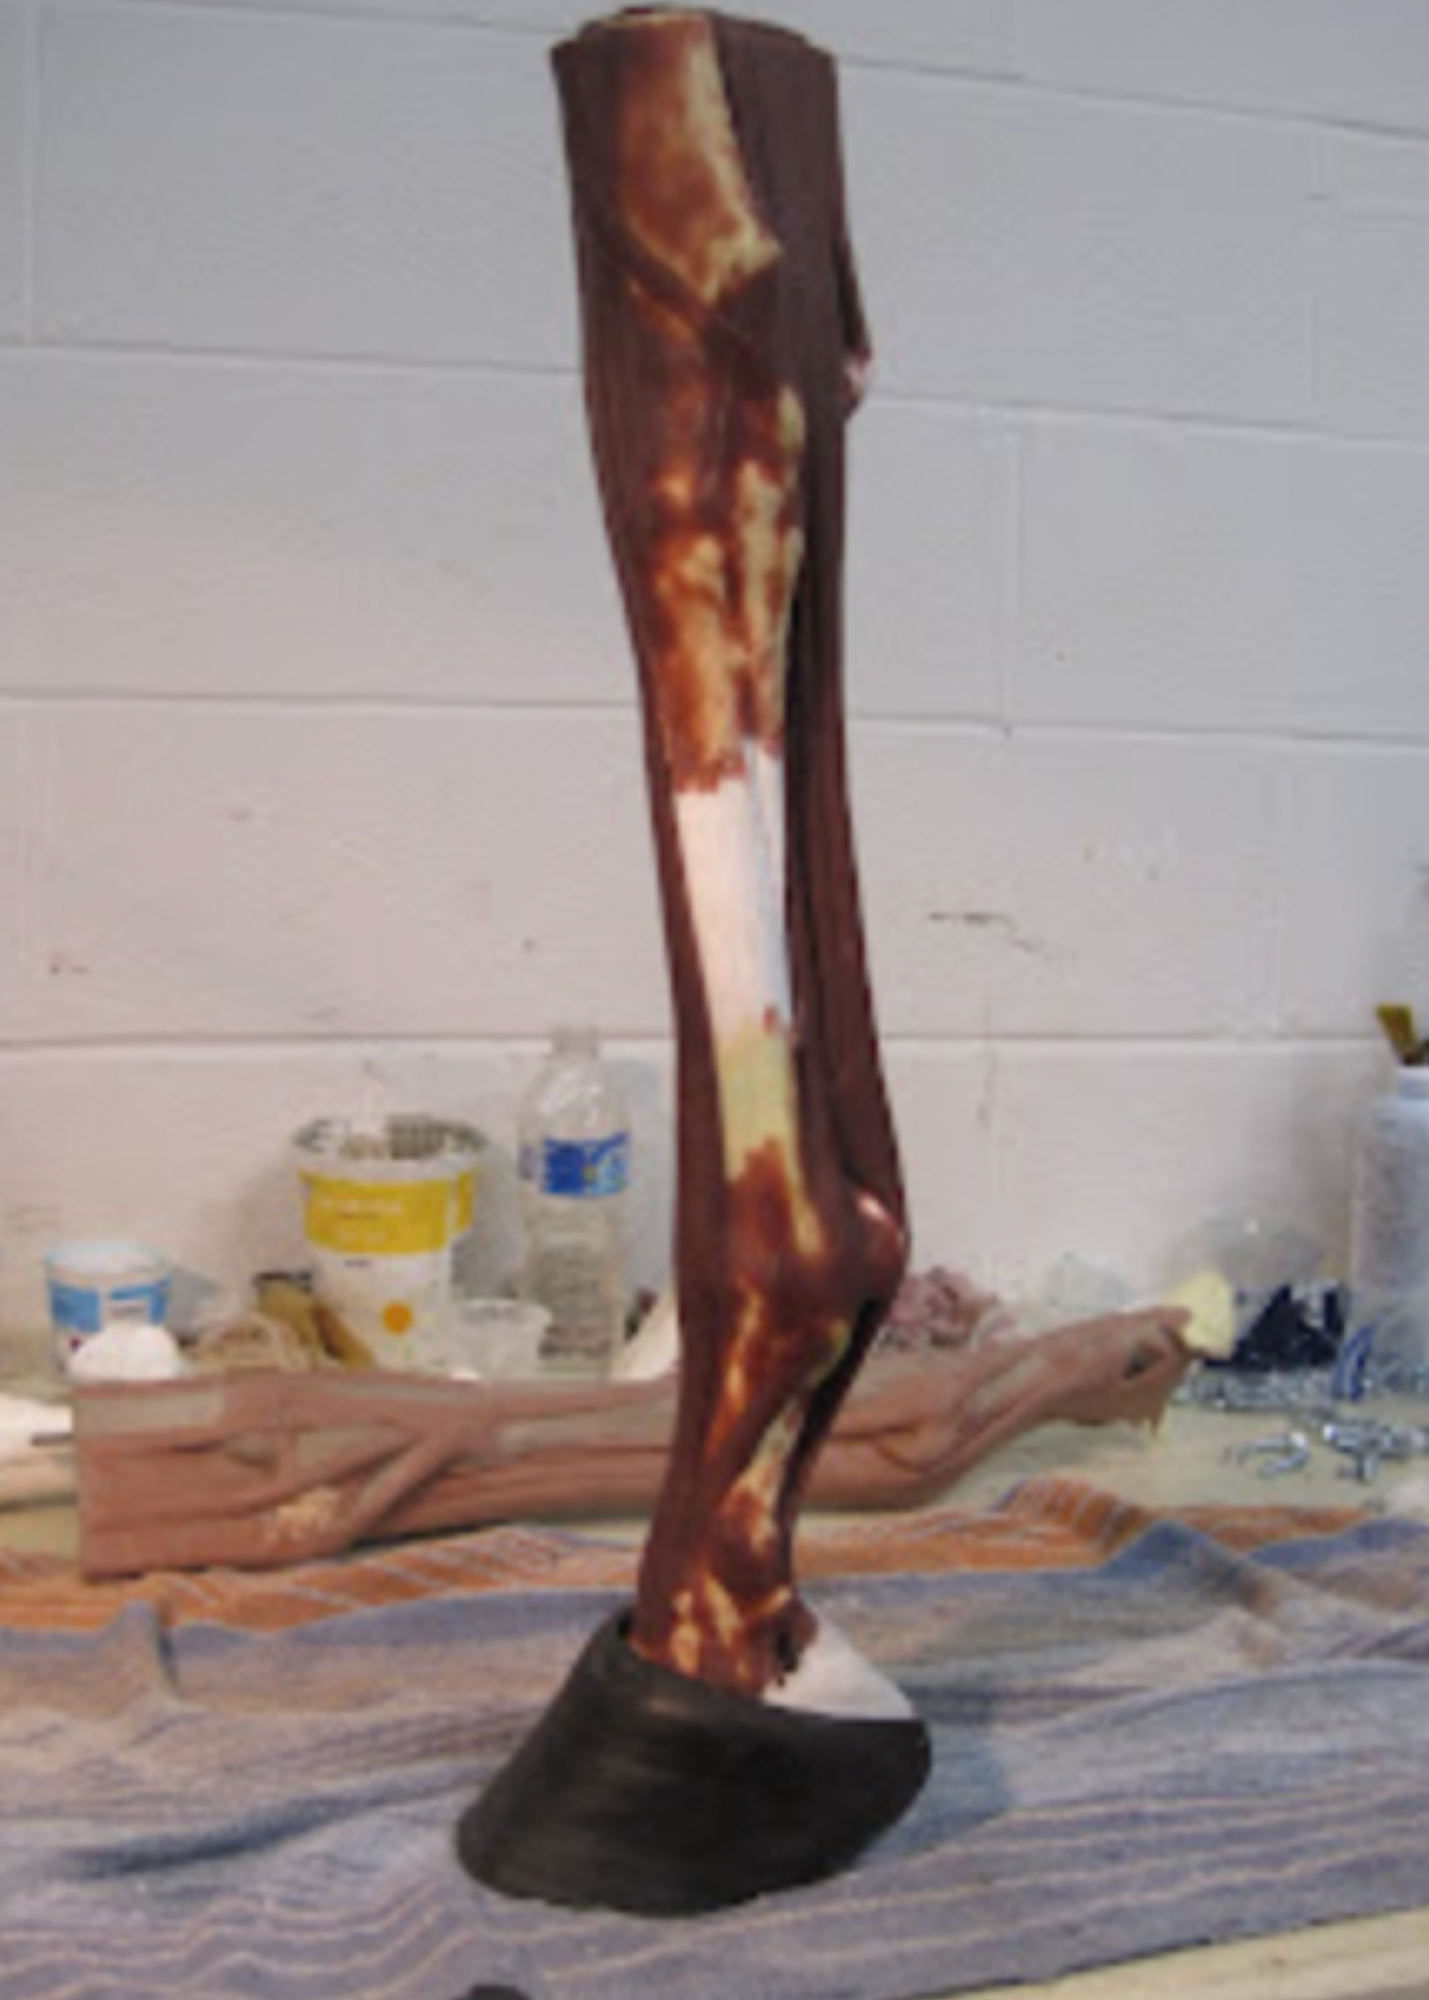  Photo of completed tendon/ligament structure. Prototype unit is now ready to receive the skin. Several different materials wil be tested in order to get the optimal results. 